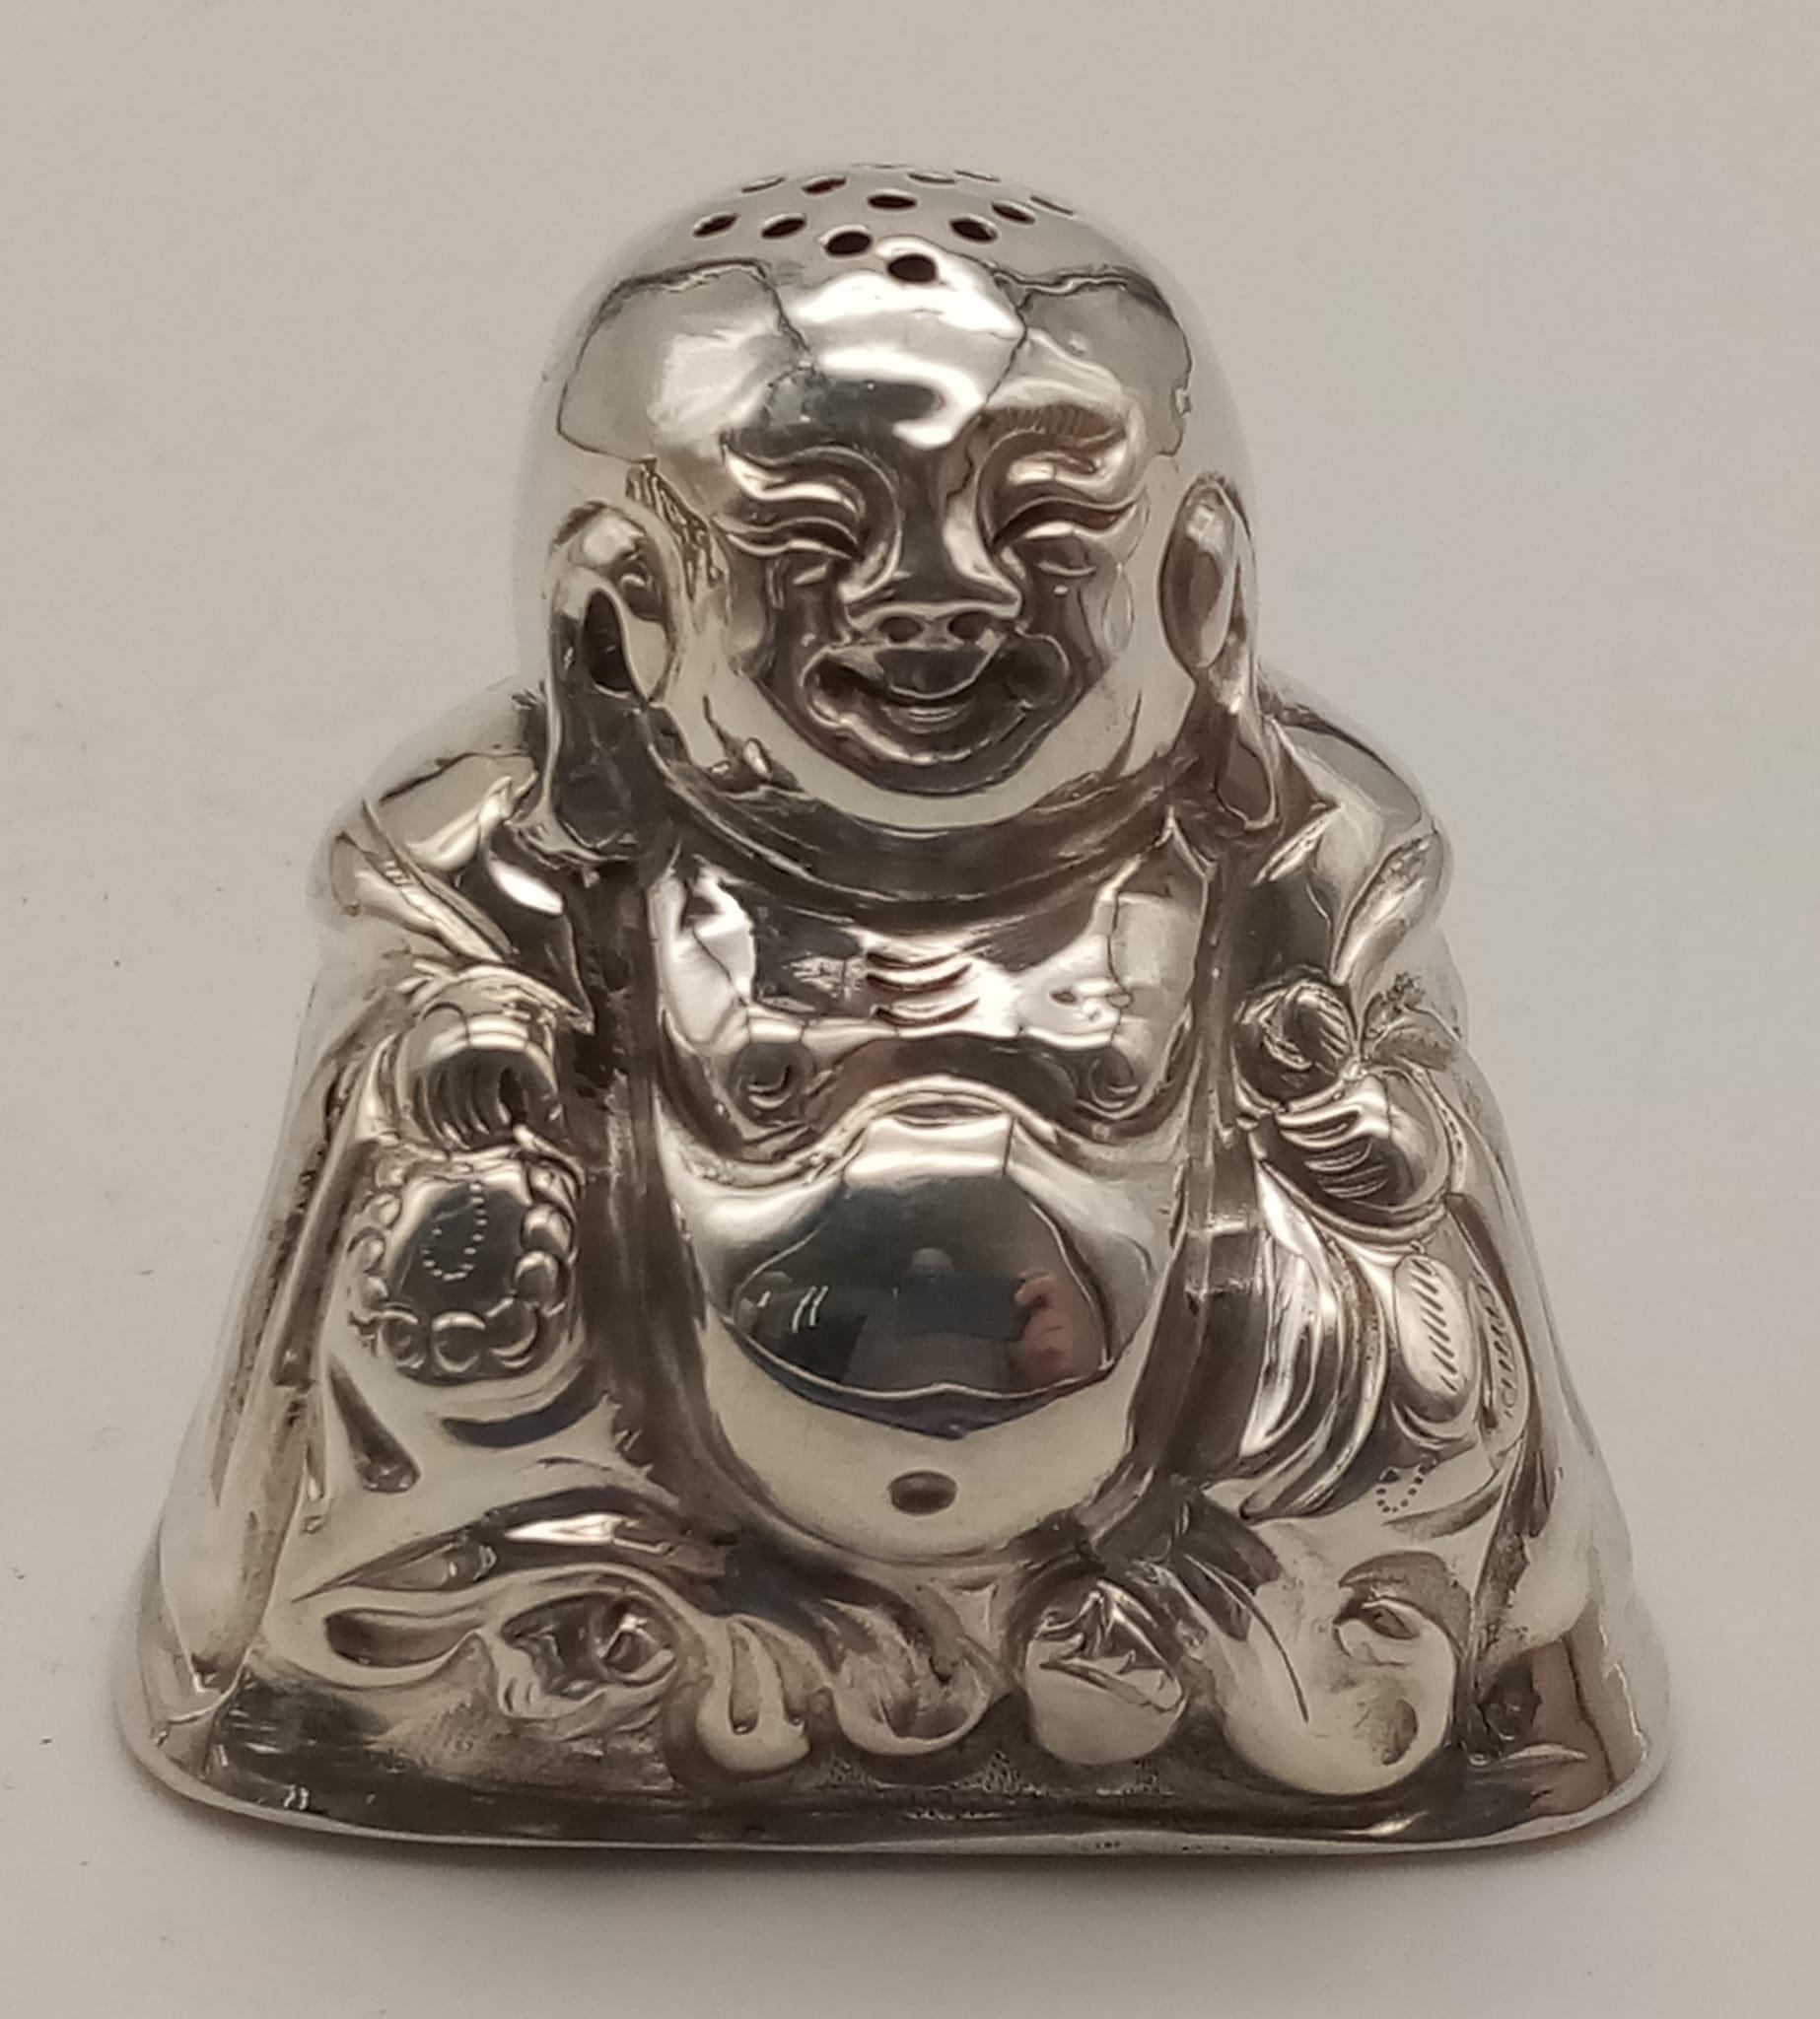 An Antique Chinese Buddha Salt and Pepper Pot. 4.5cm tall. 31.5g total weight. - Image 3 of 11